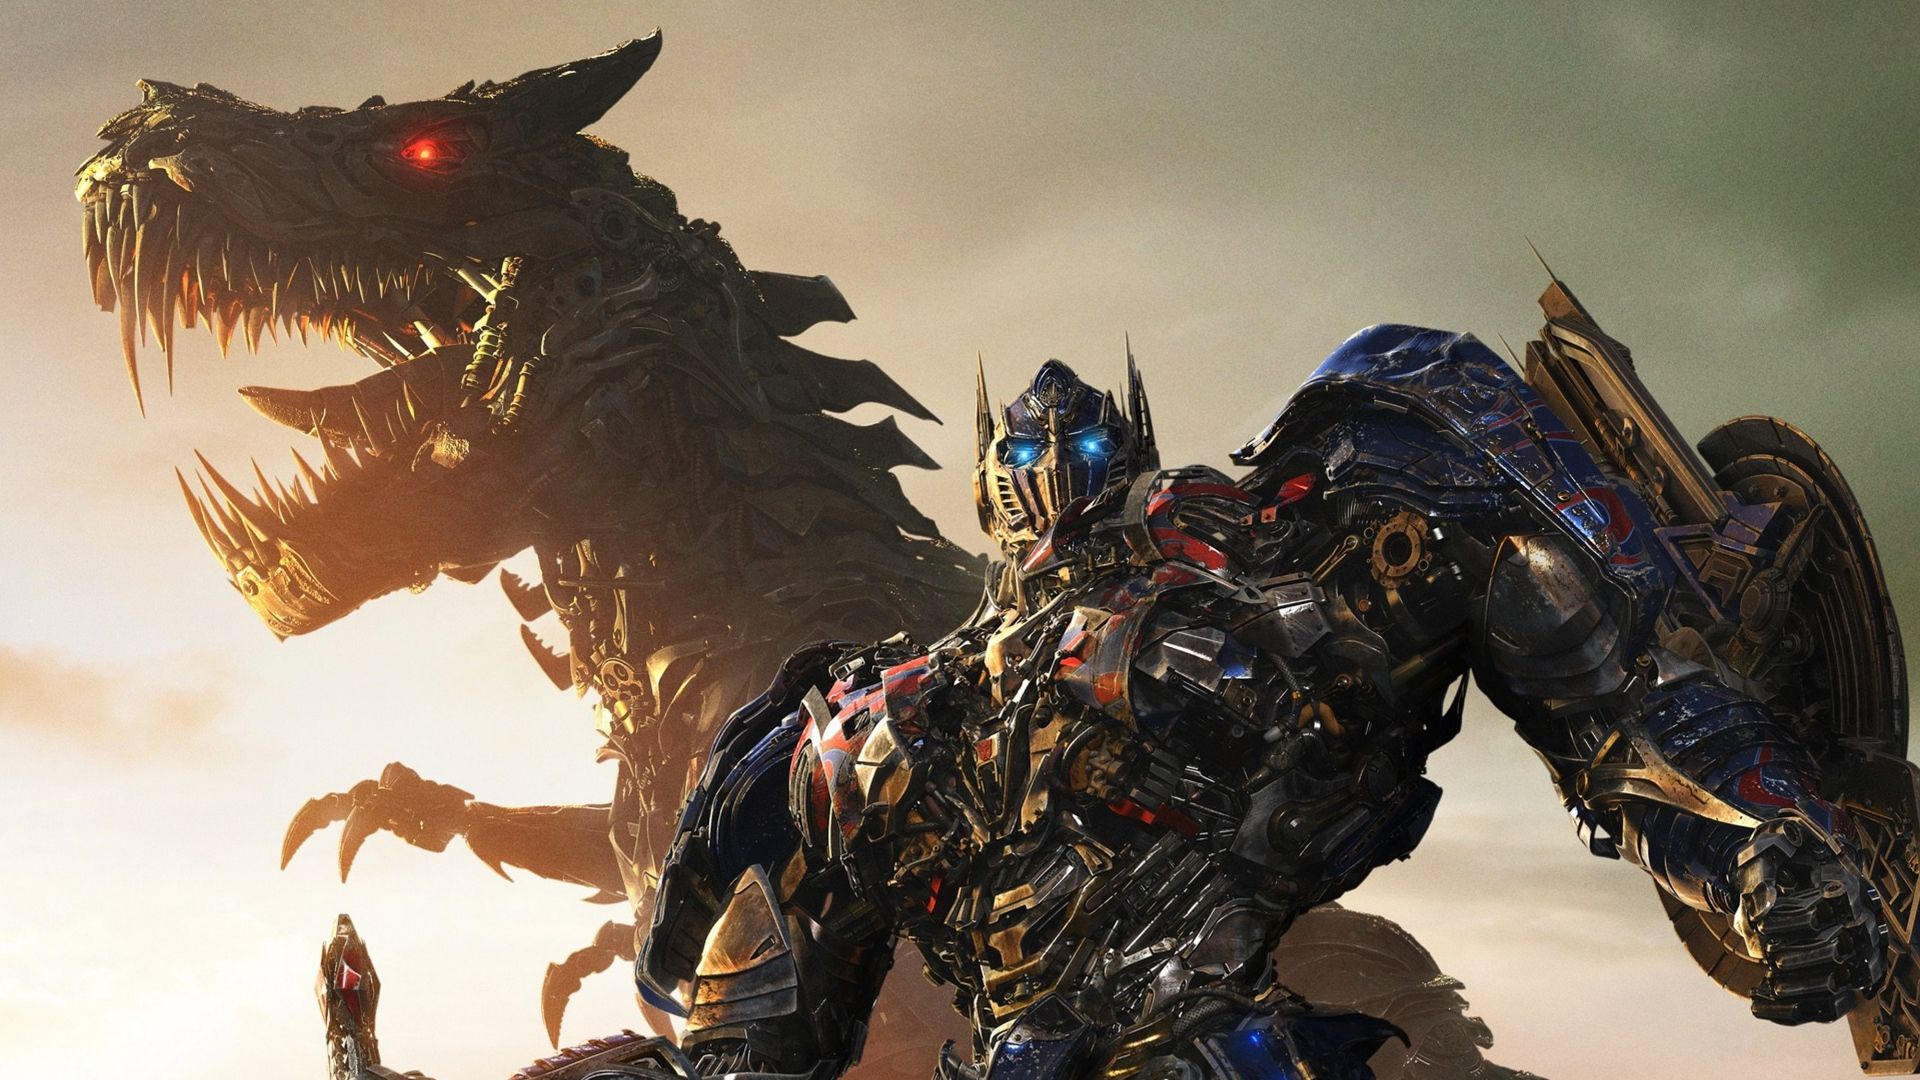 Download Wallpaper 1920x1080 Transformers age of extinction ...